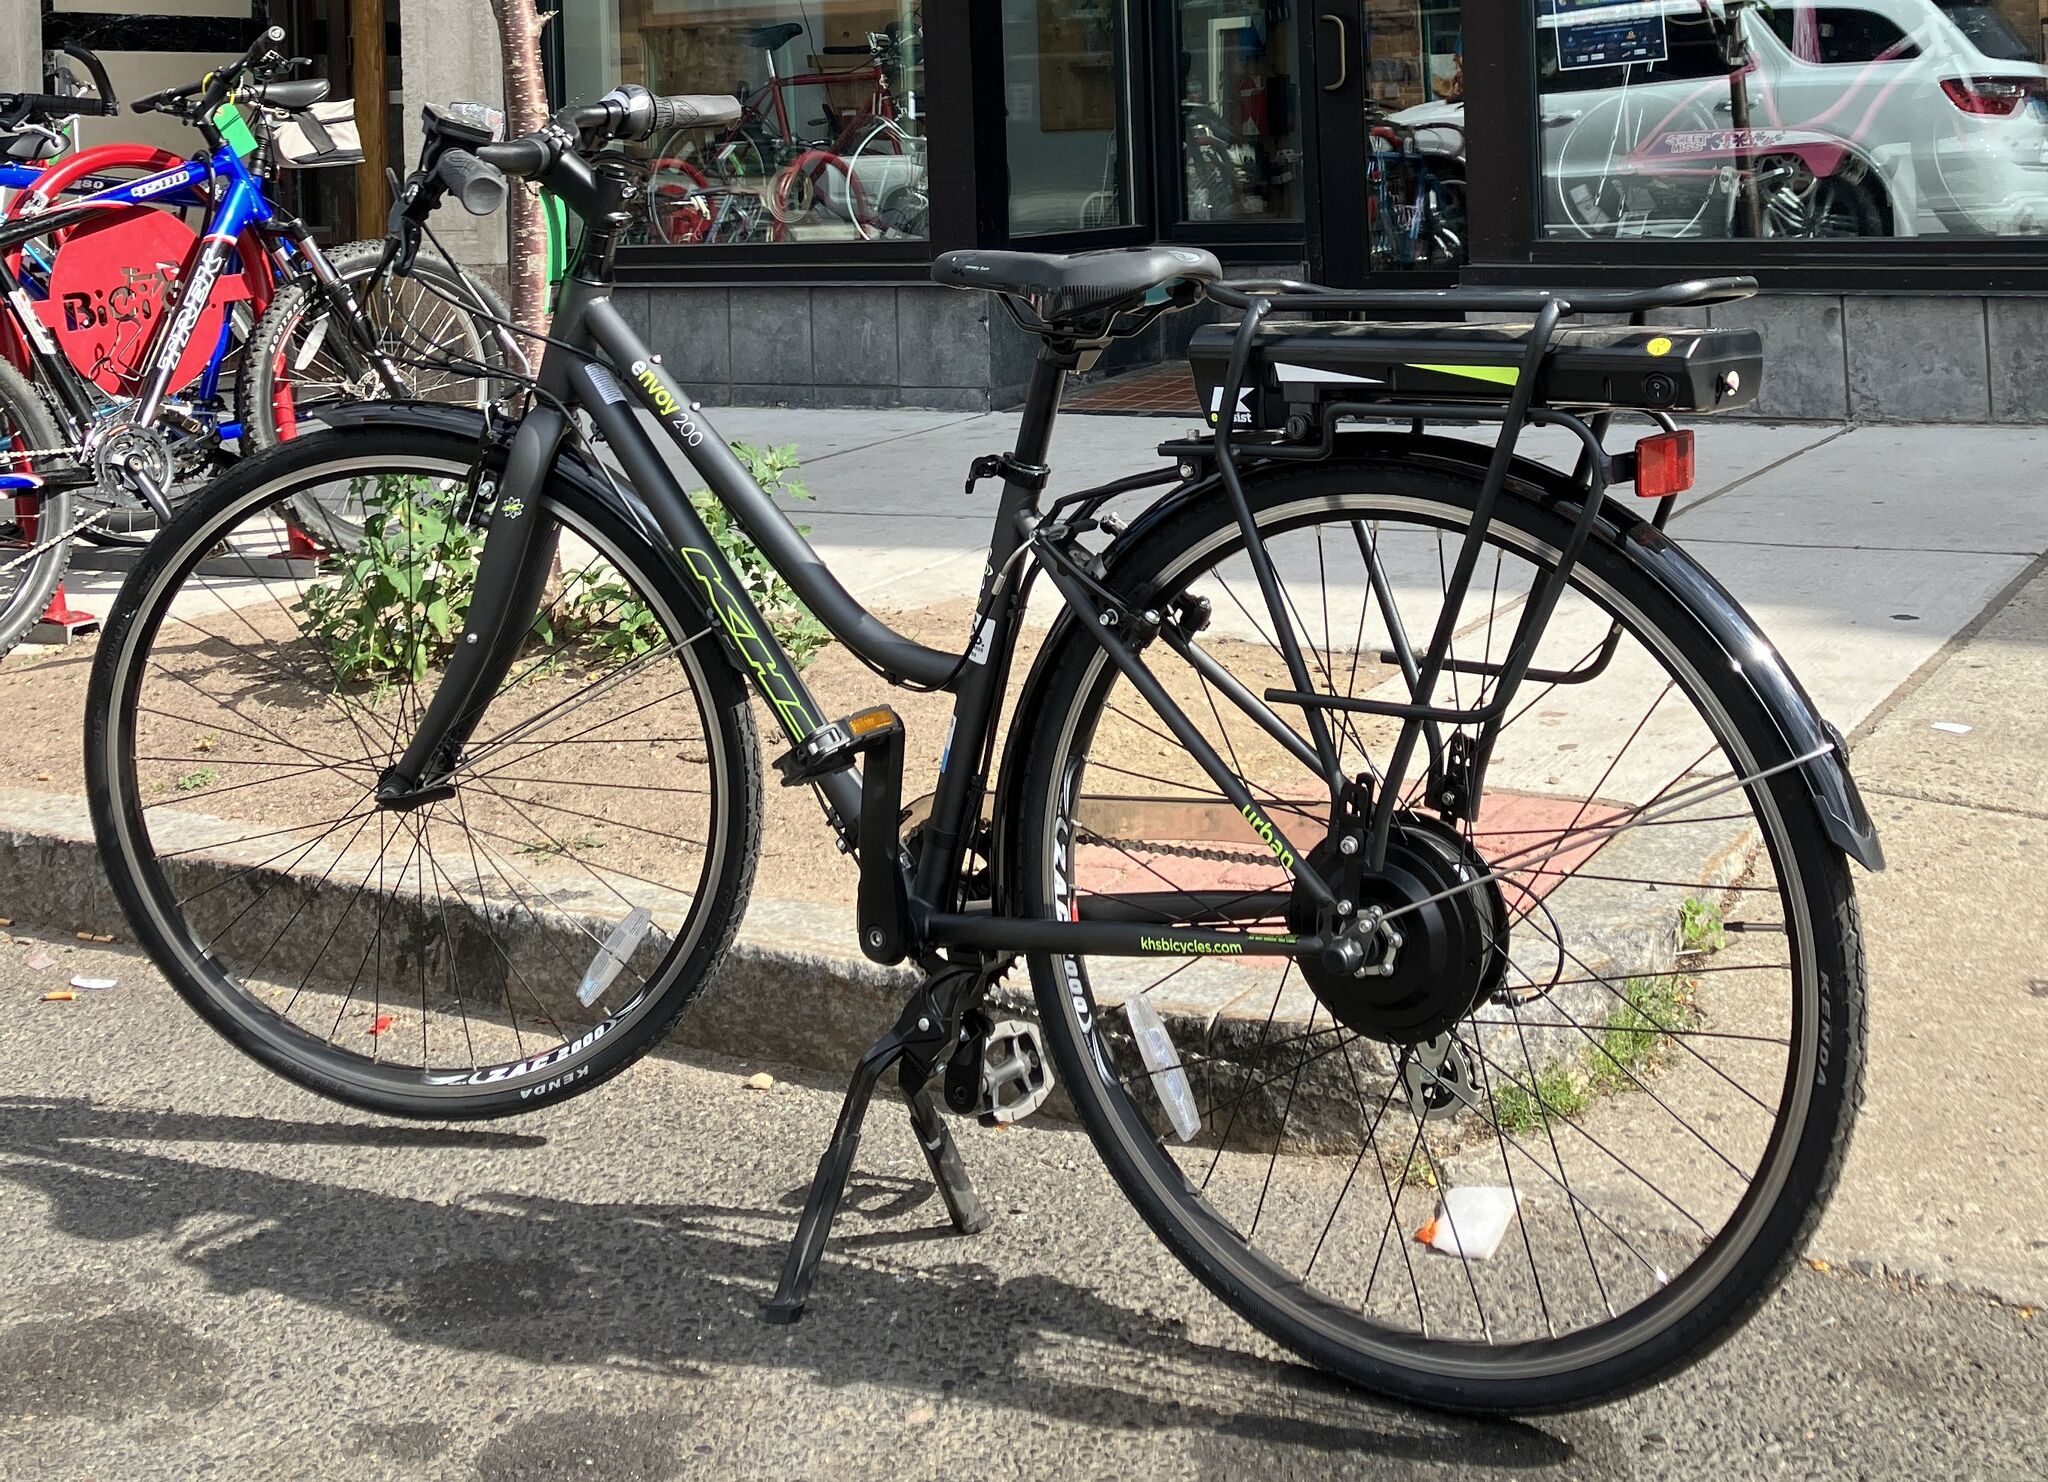 How CT residents can get up to 1,500 in rebates for ebike purchases